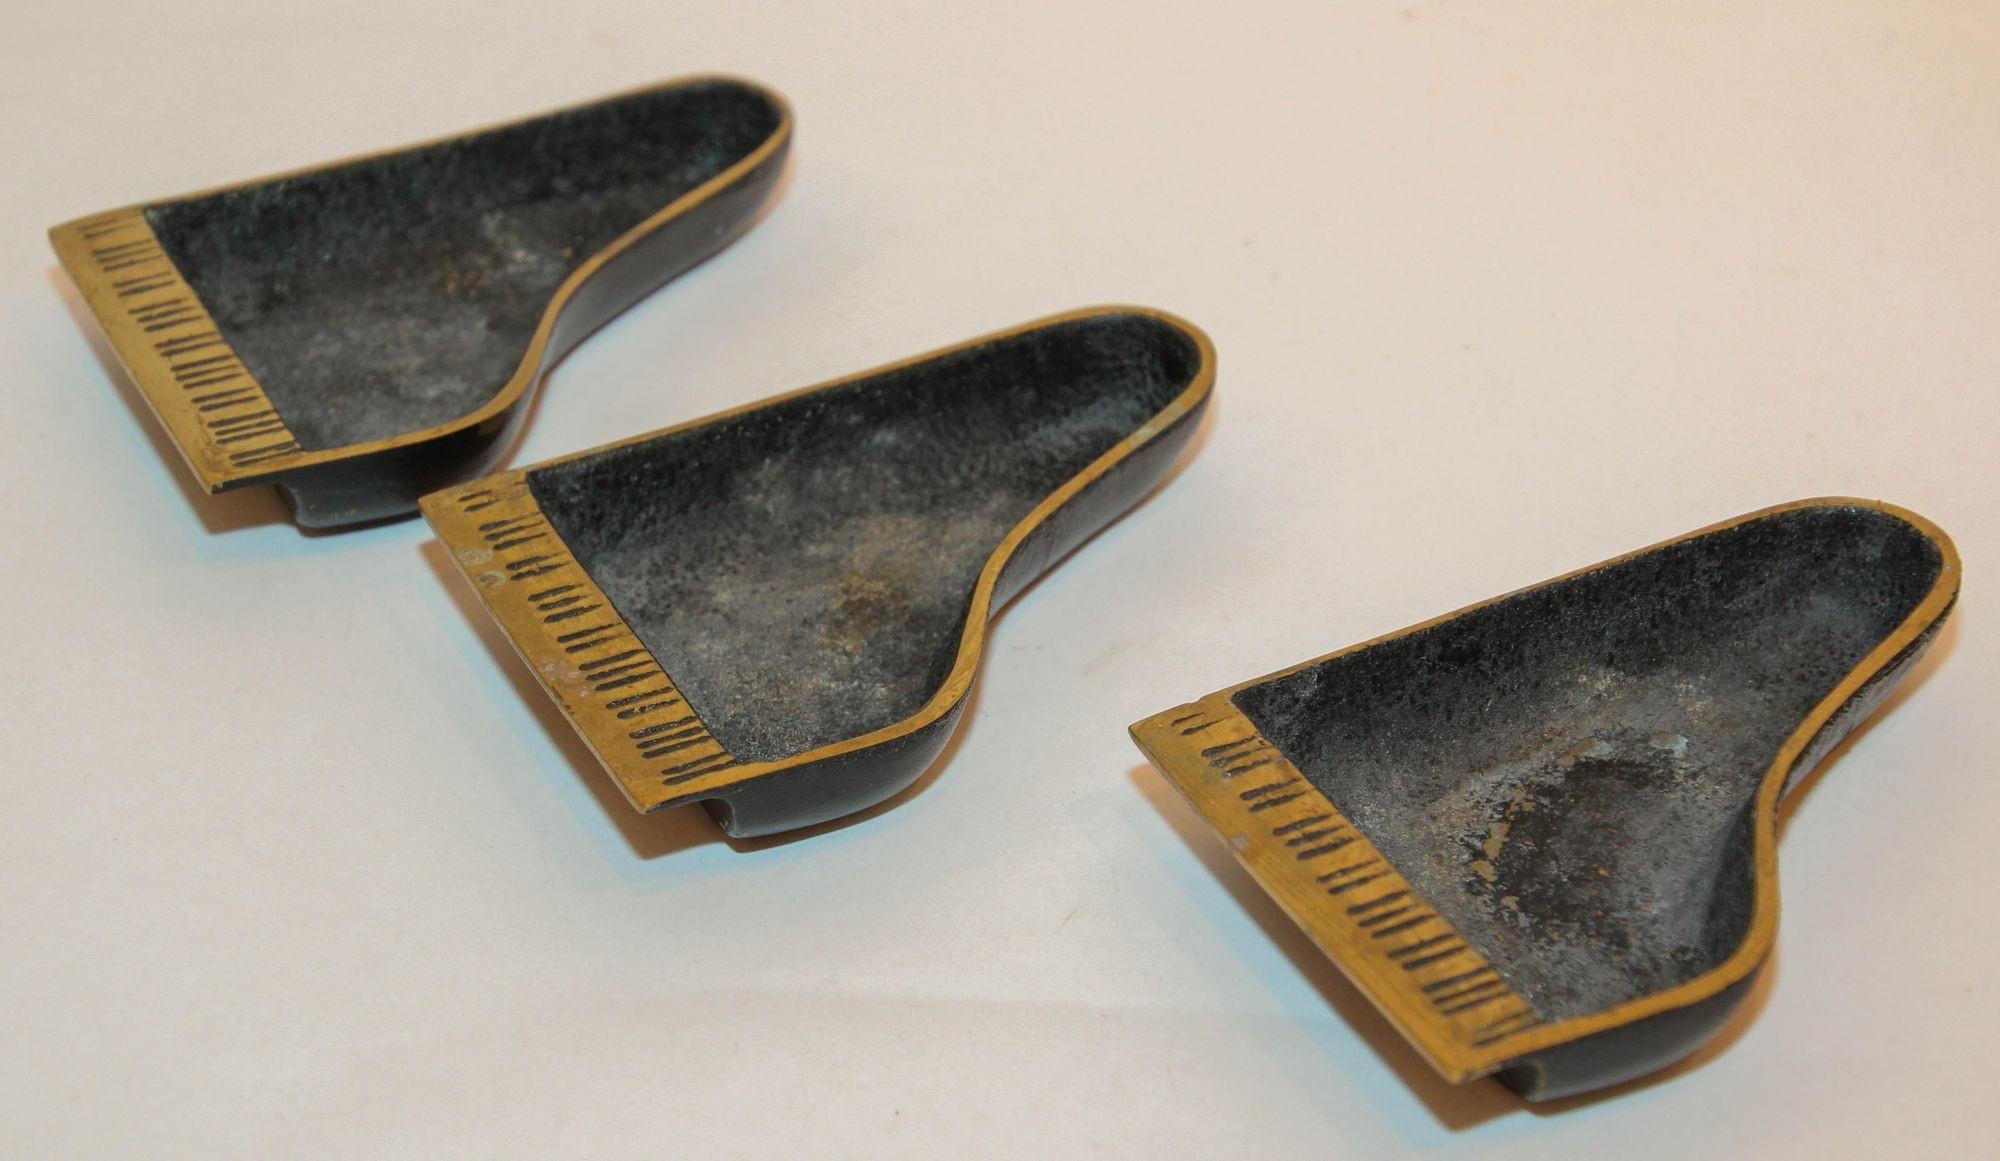 1950's Vintage Piano Form Brass Ashtray Israel Set of 3.
These brass ashtrays are shaped like a grand piano handcrafted by Dayagi of Israel.
Mid-Century Dayagi Brass Ashtrays - a Set of 3.
Vintage Dayagi Black Enameled Brass Metal and Ashtrays Made